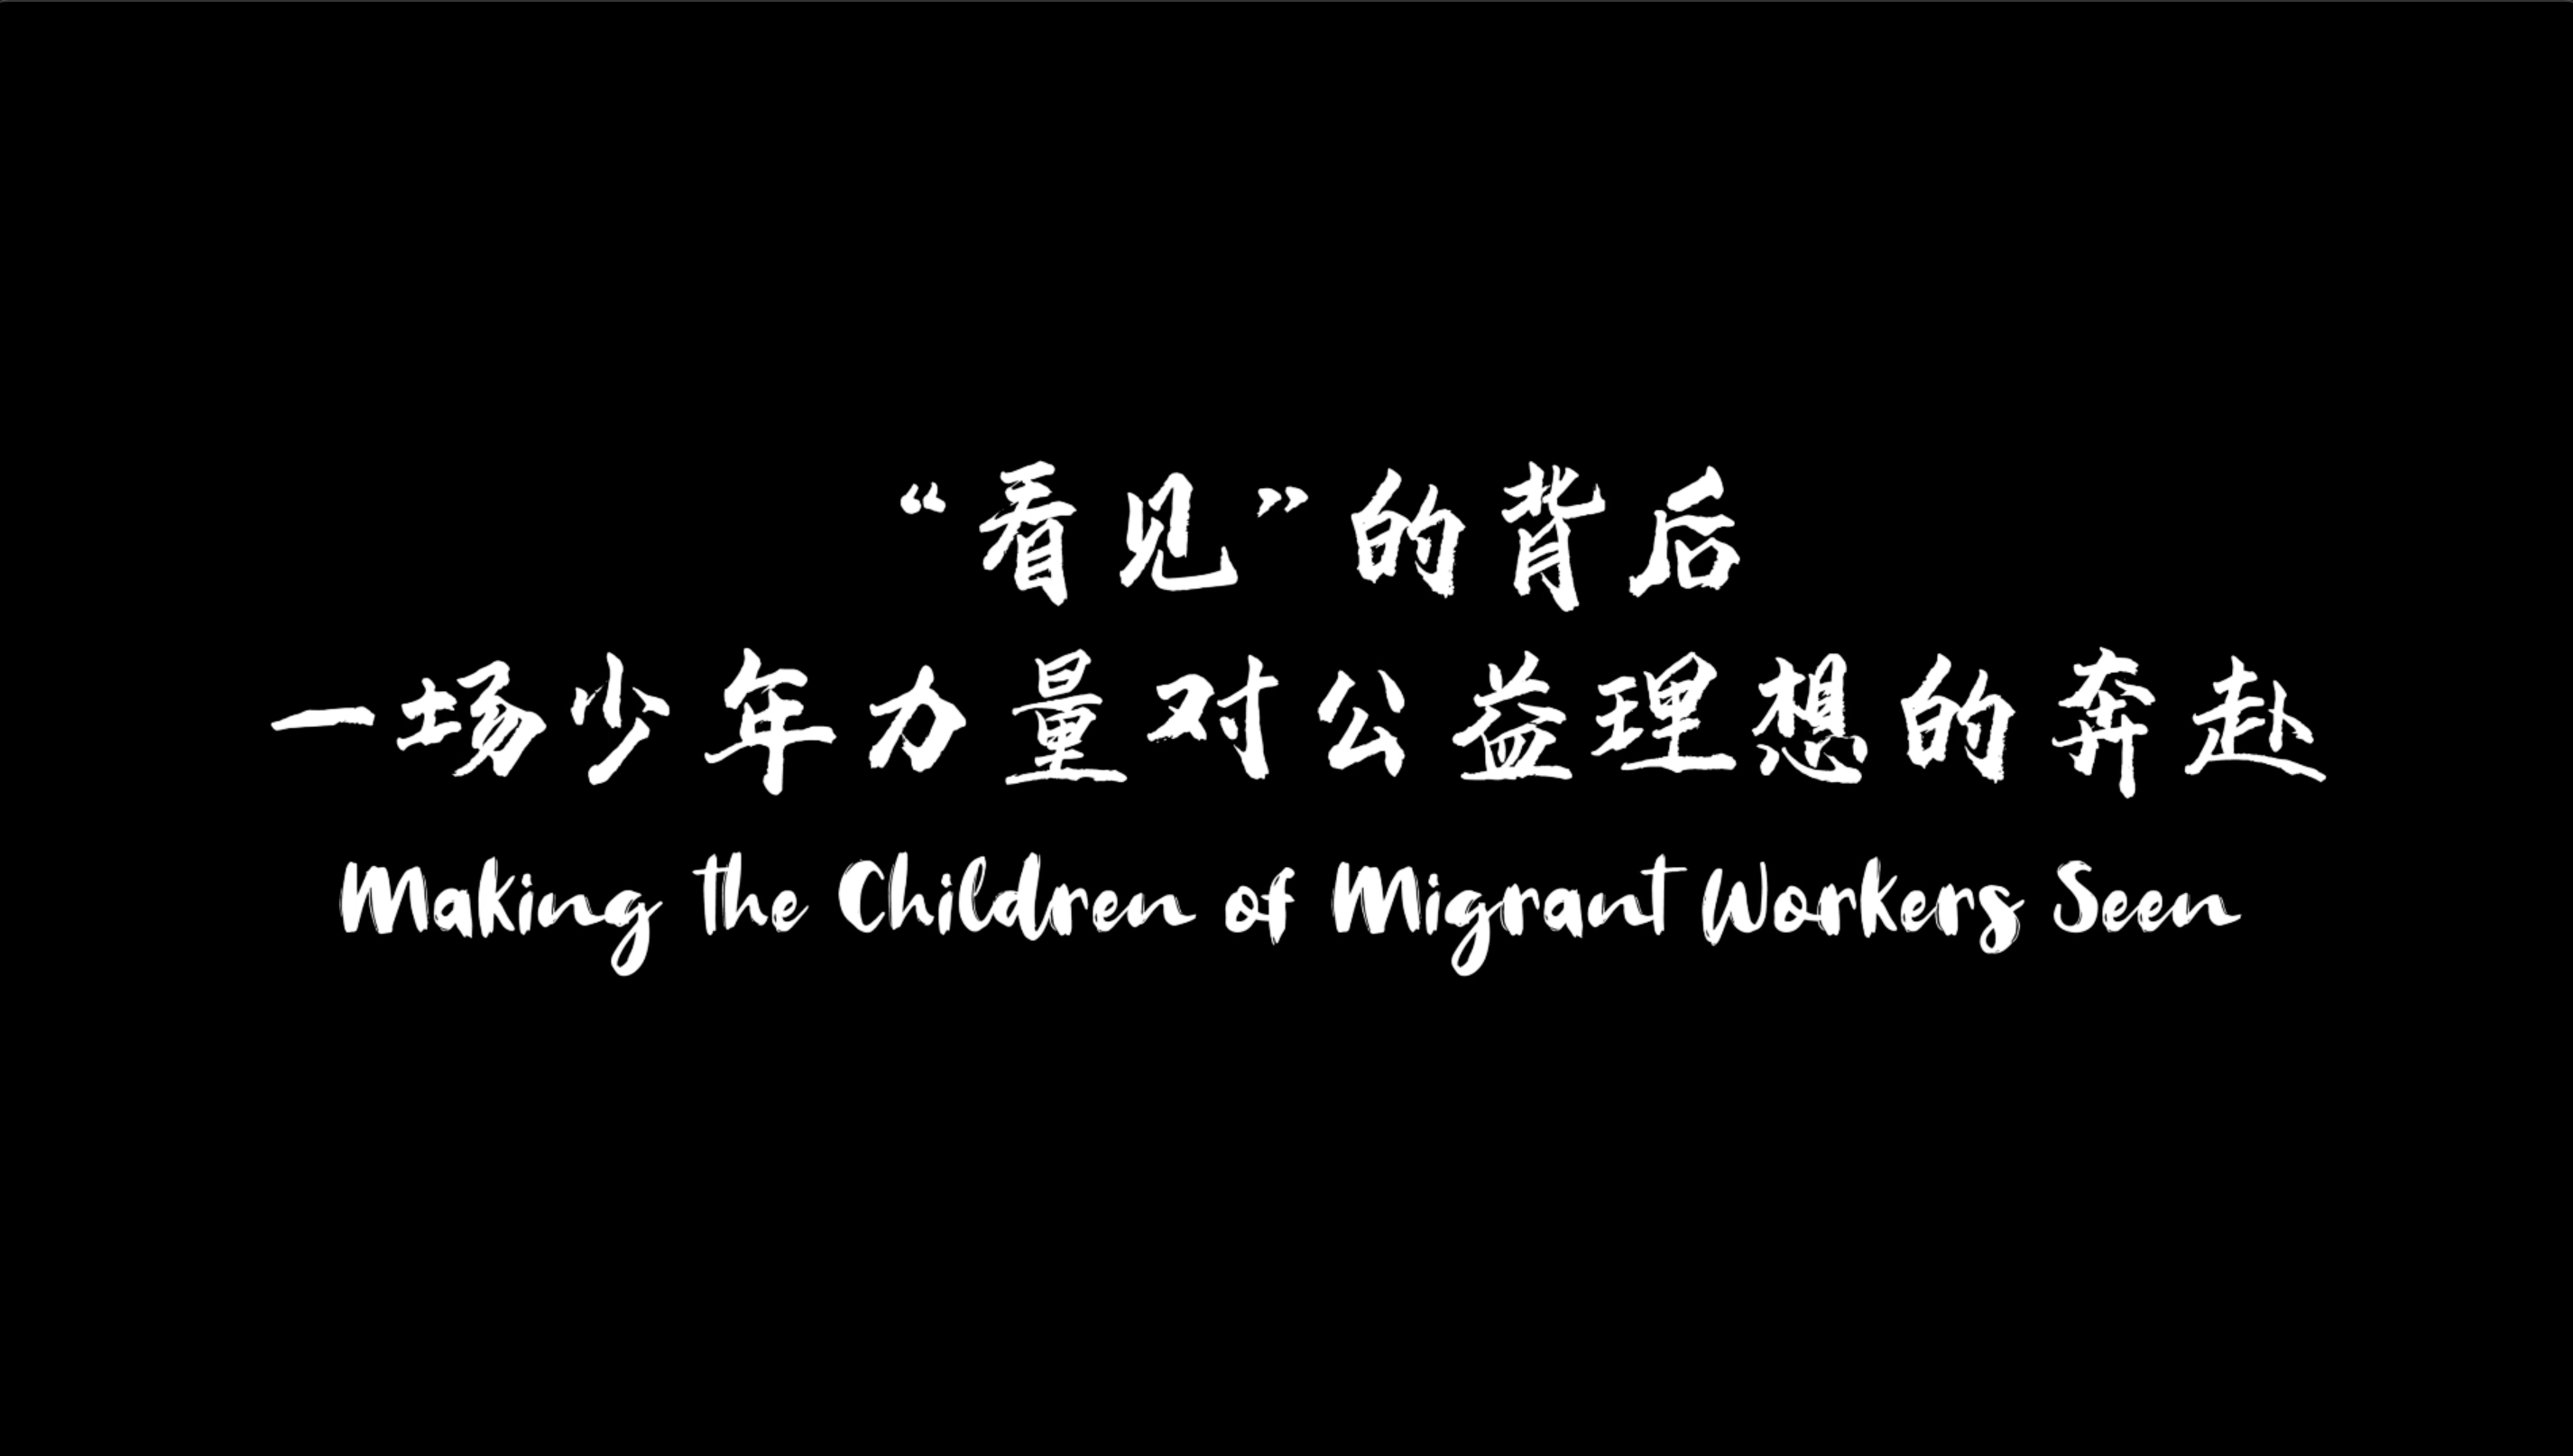 Making the Children of Migrant Workers Seen